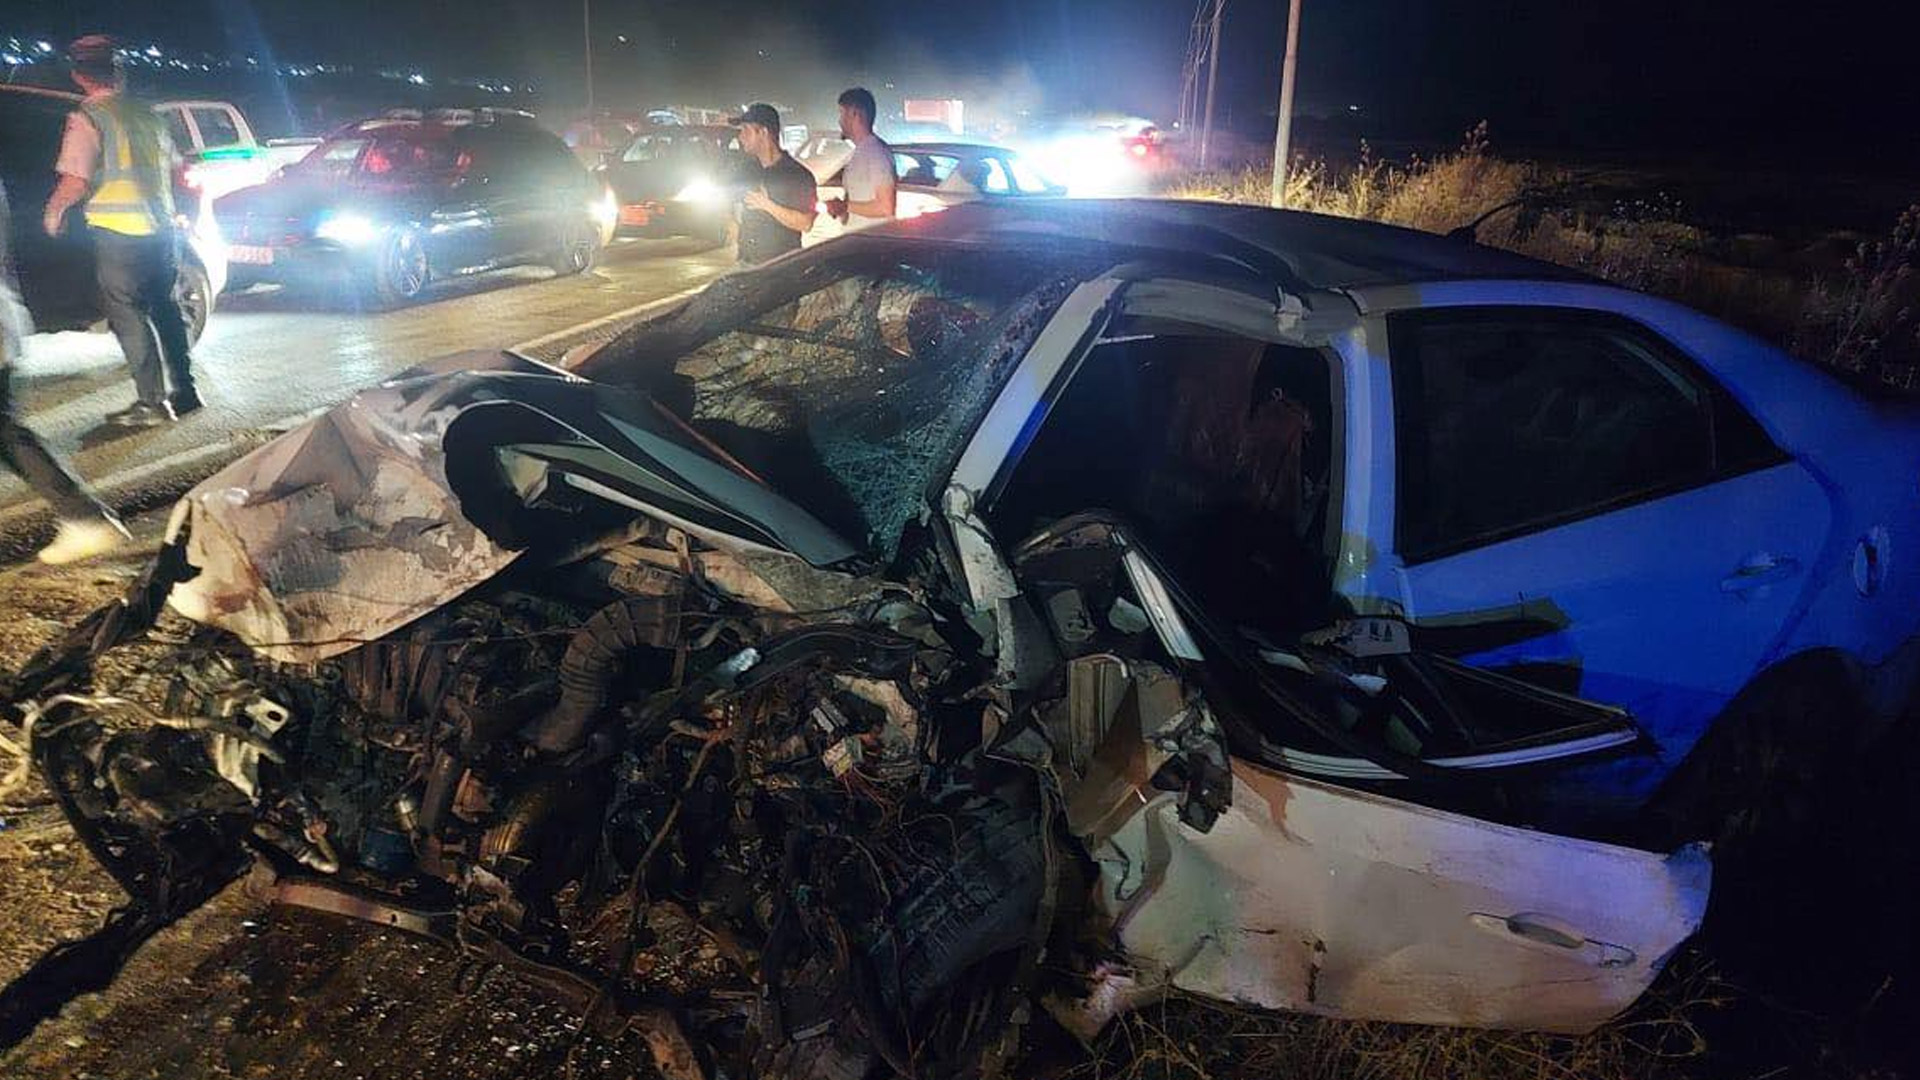 Iraq road deaths rose to +3000 despite drop in accidents in 2023: official